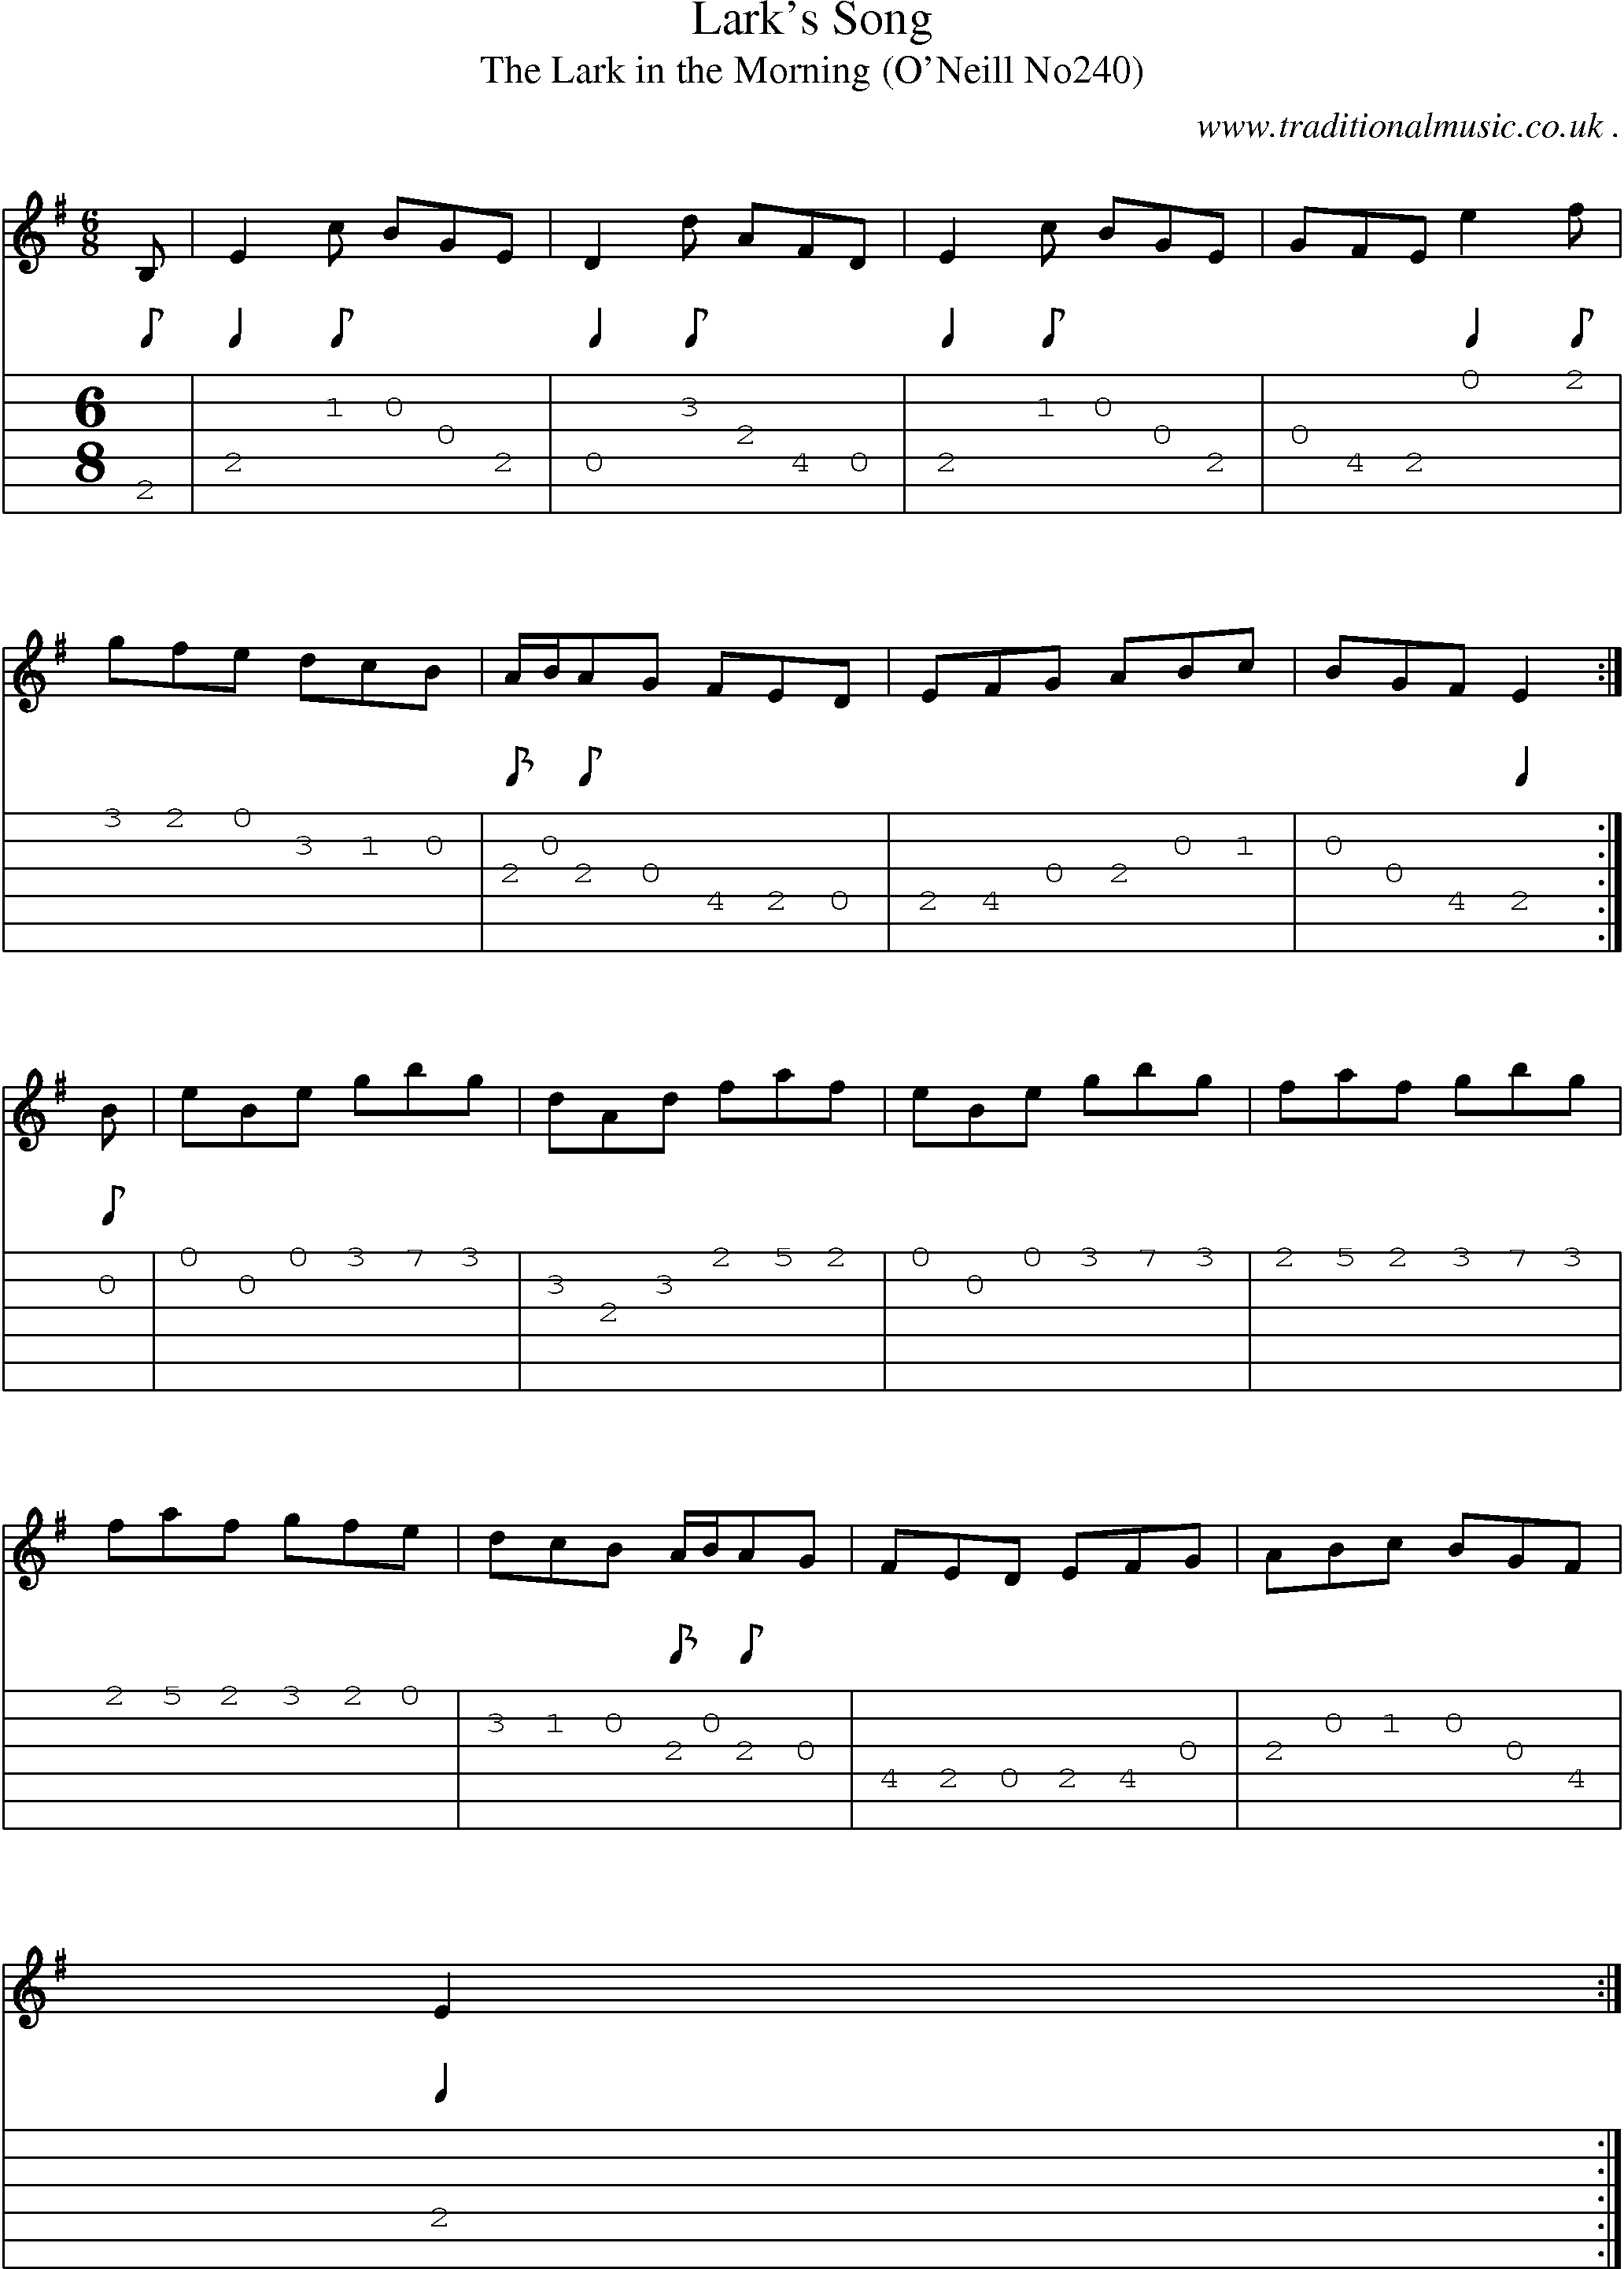 Sheet-Music and Guitar Tabs for Larks Song